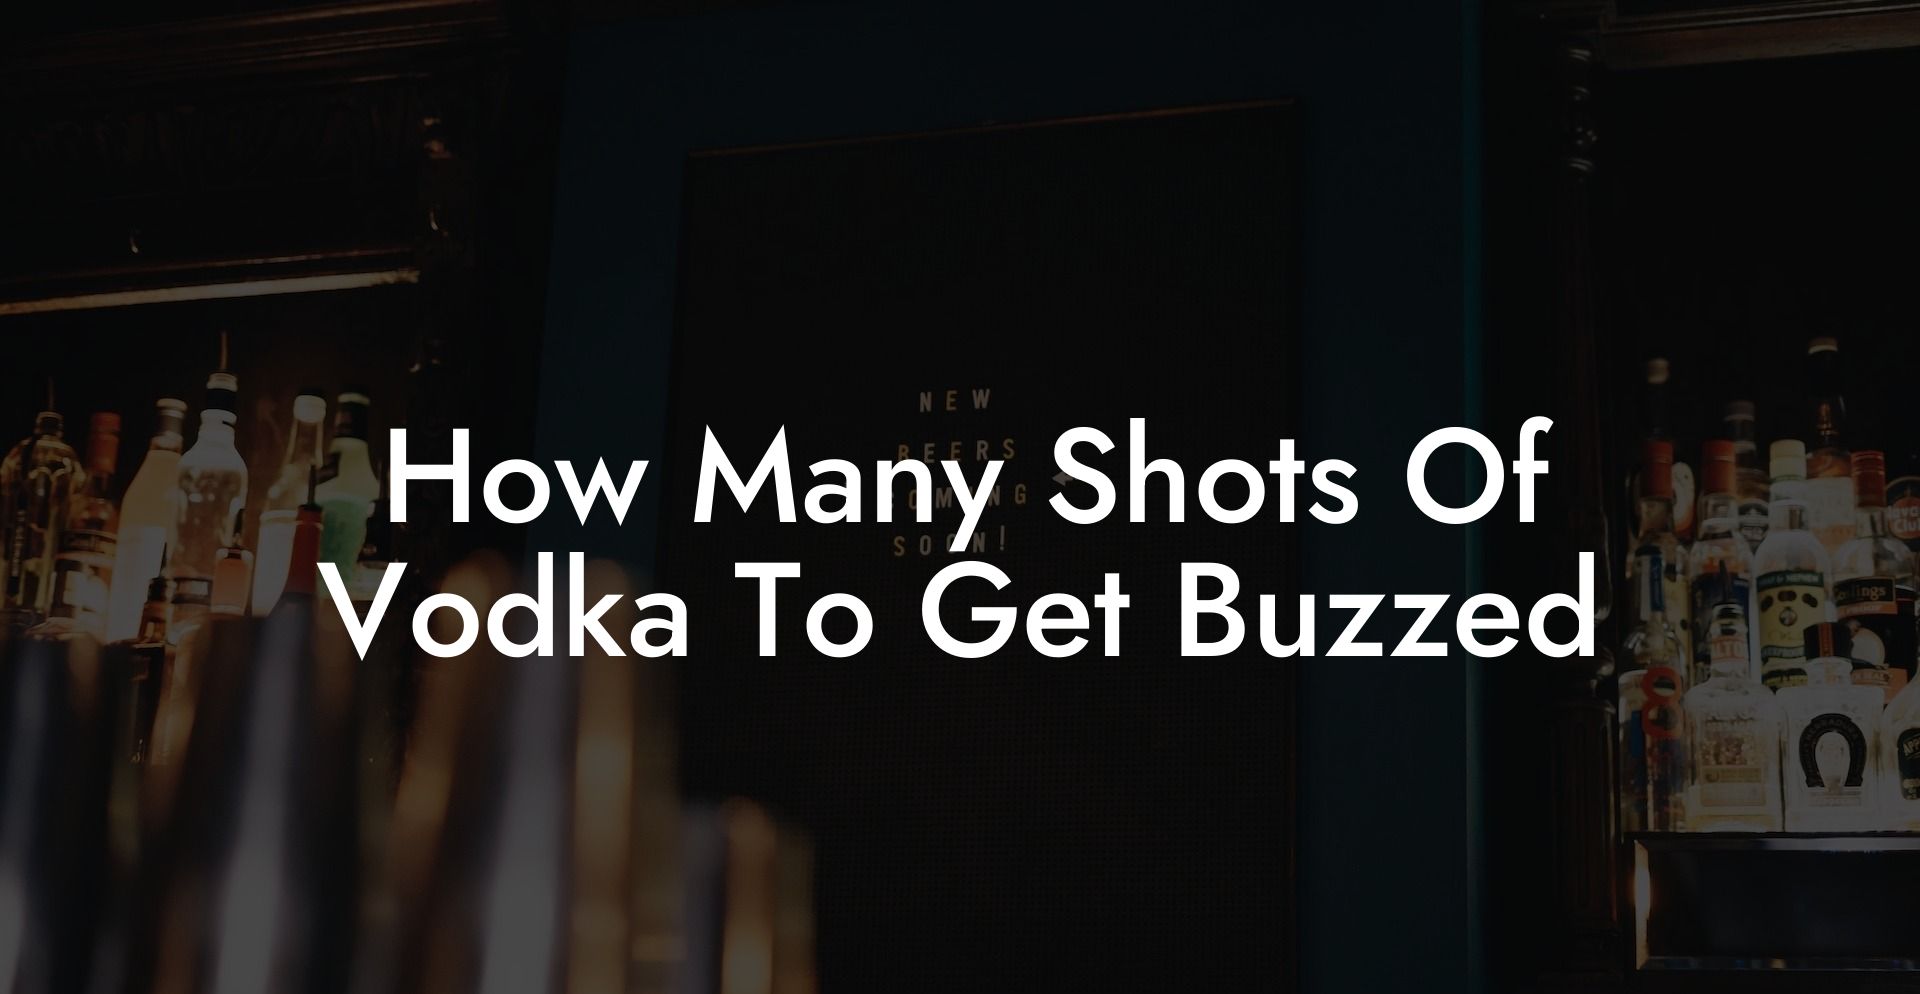 How Many Shots Of Vodka To Get Buzzed